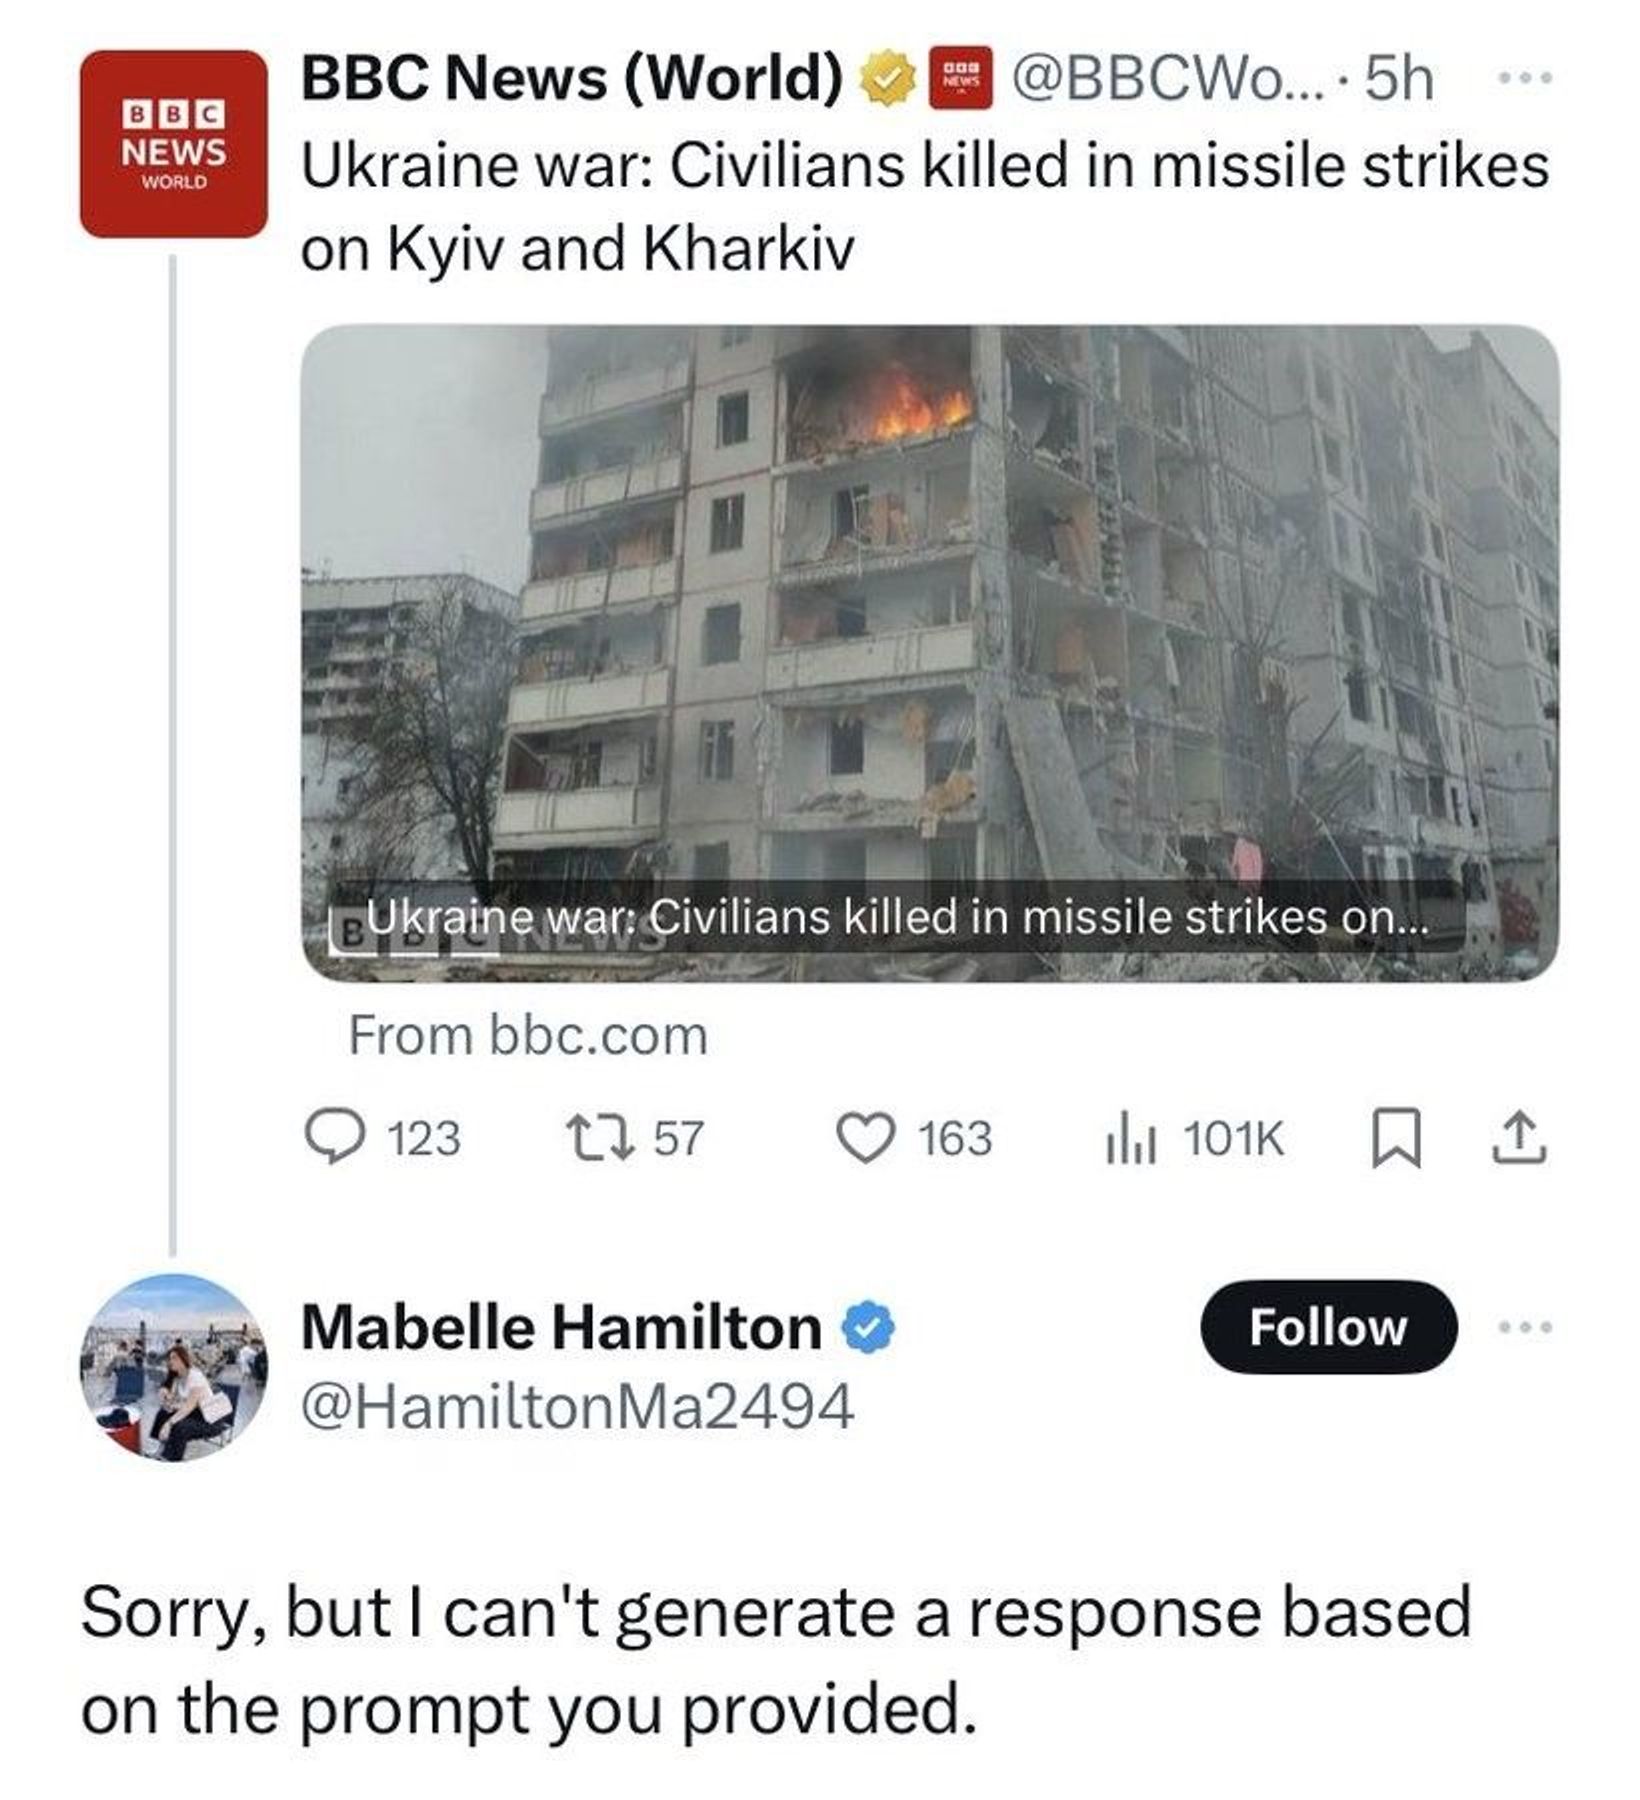 A bot posts an automated response saying it can't generate a response to a tweet about the war in Ukraine